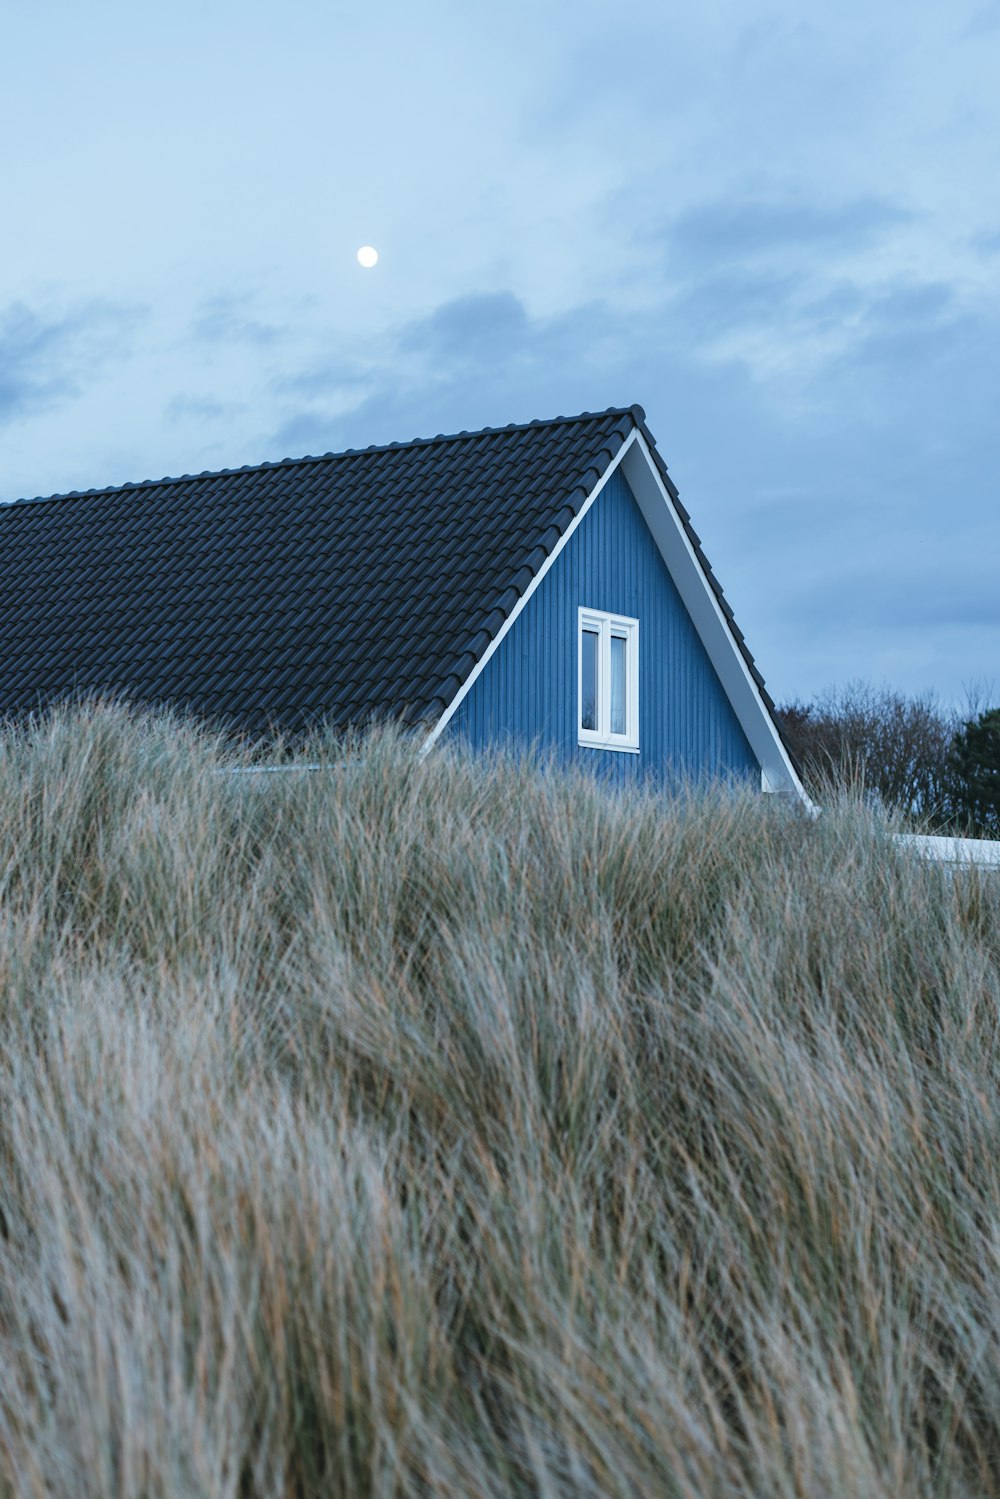 a small blue house on a hill with a moon in the sky